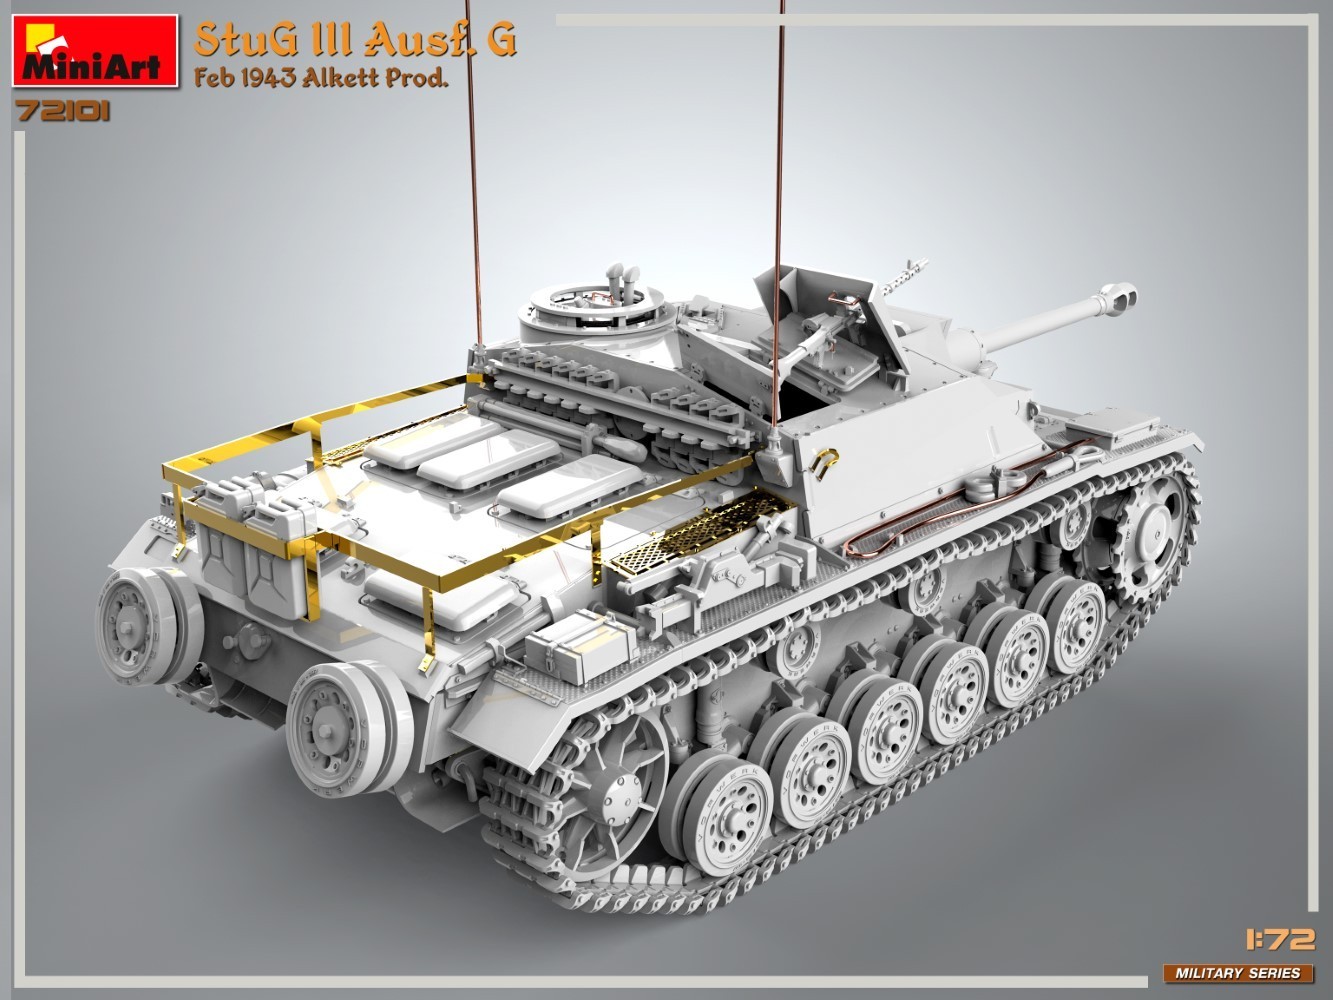 New Military Series Announced in 1/72 Scale, Starting with StuG III Ausf. G CAD-2